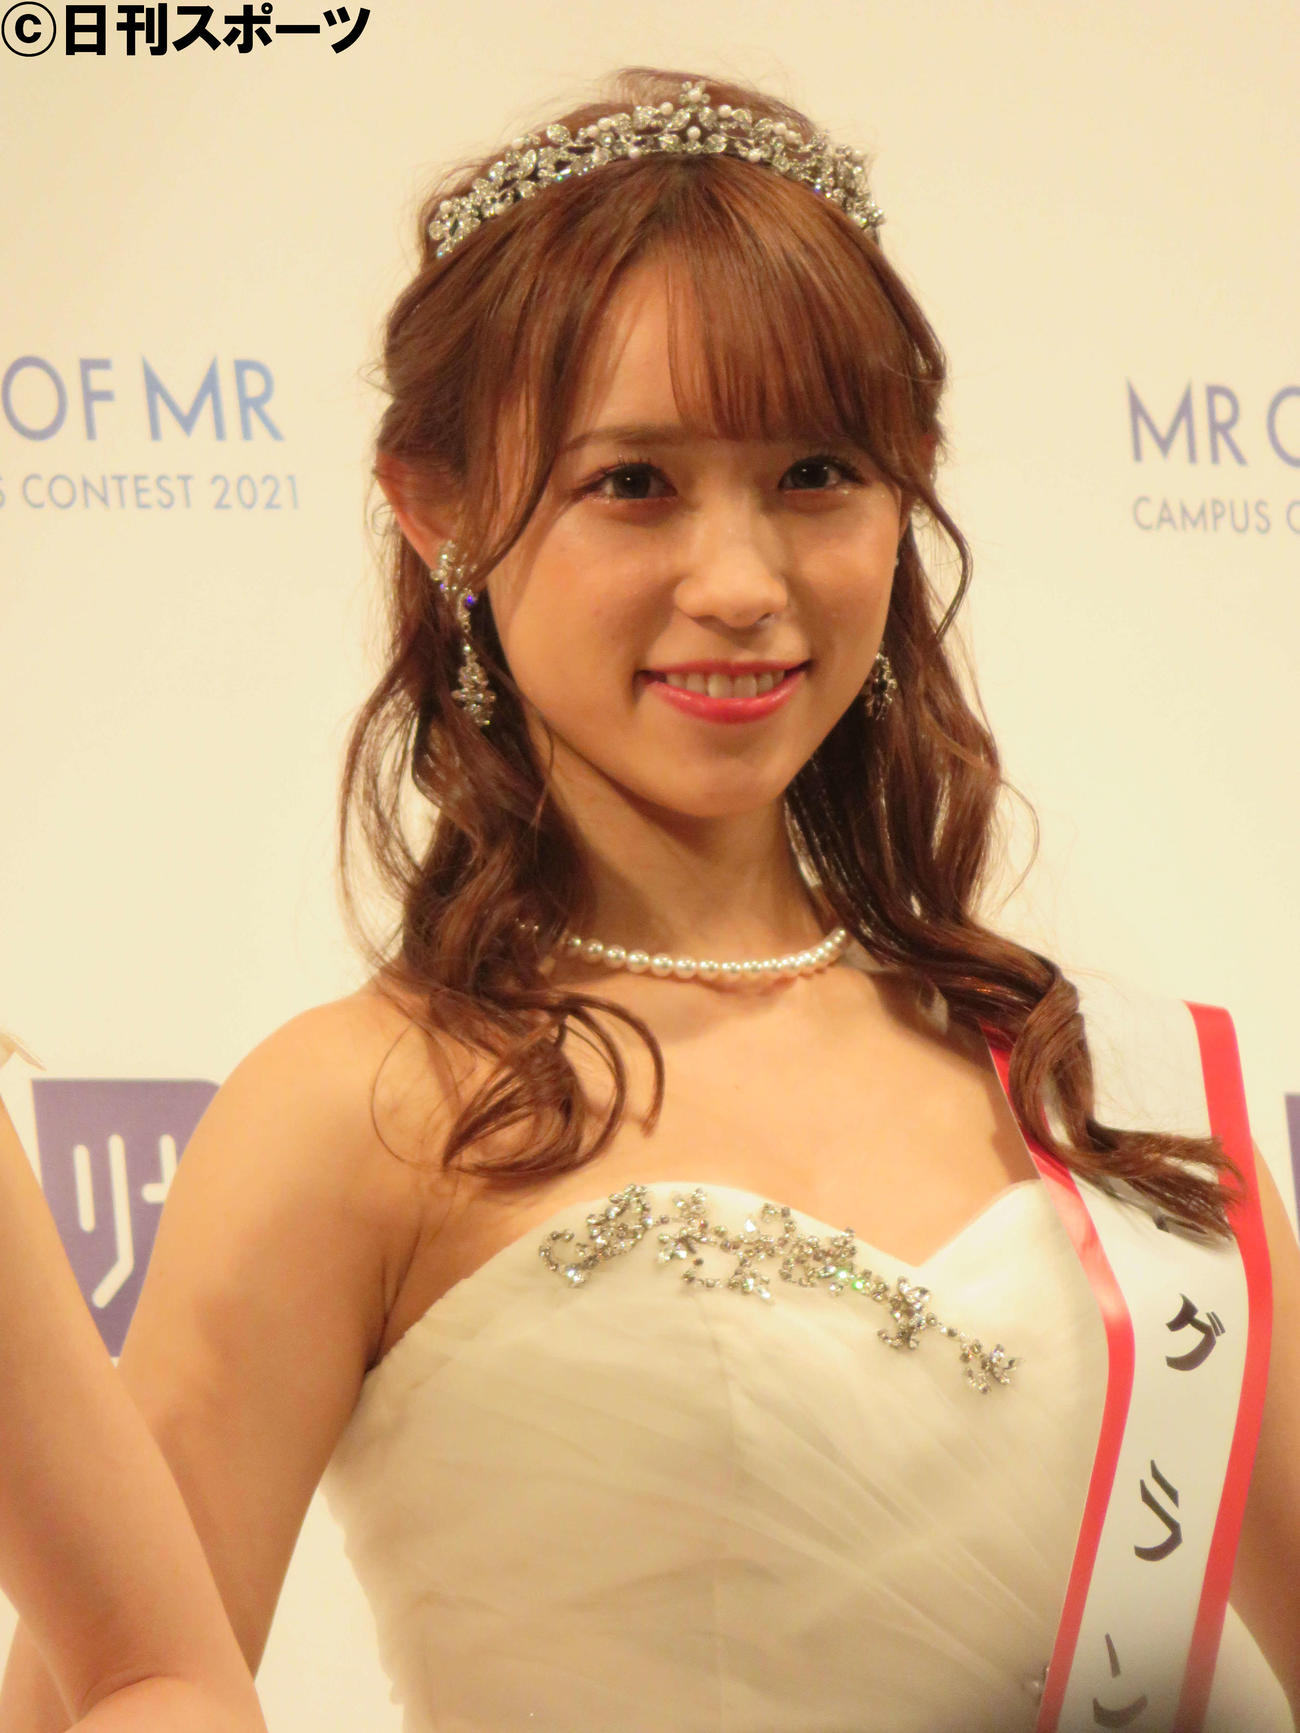 「MISS OF MISS CAMPUS QUEEN CONTEST 2021 supported by　リゼクリニック」で準グランプリを受賞した山本瑠香さん（撮影・三須佳夏）